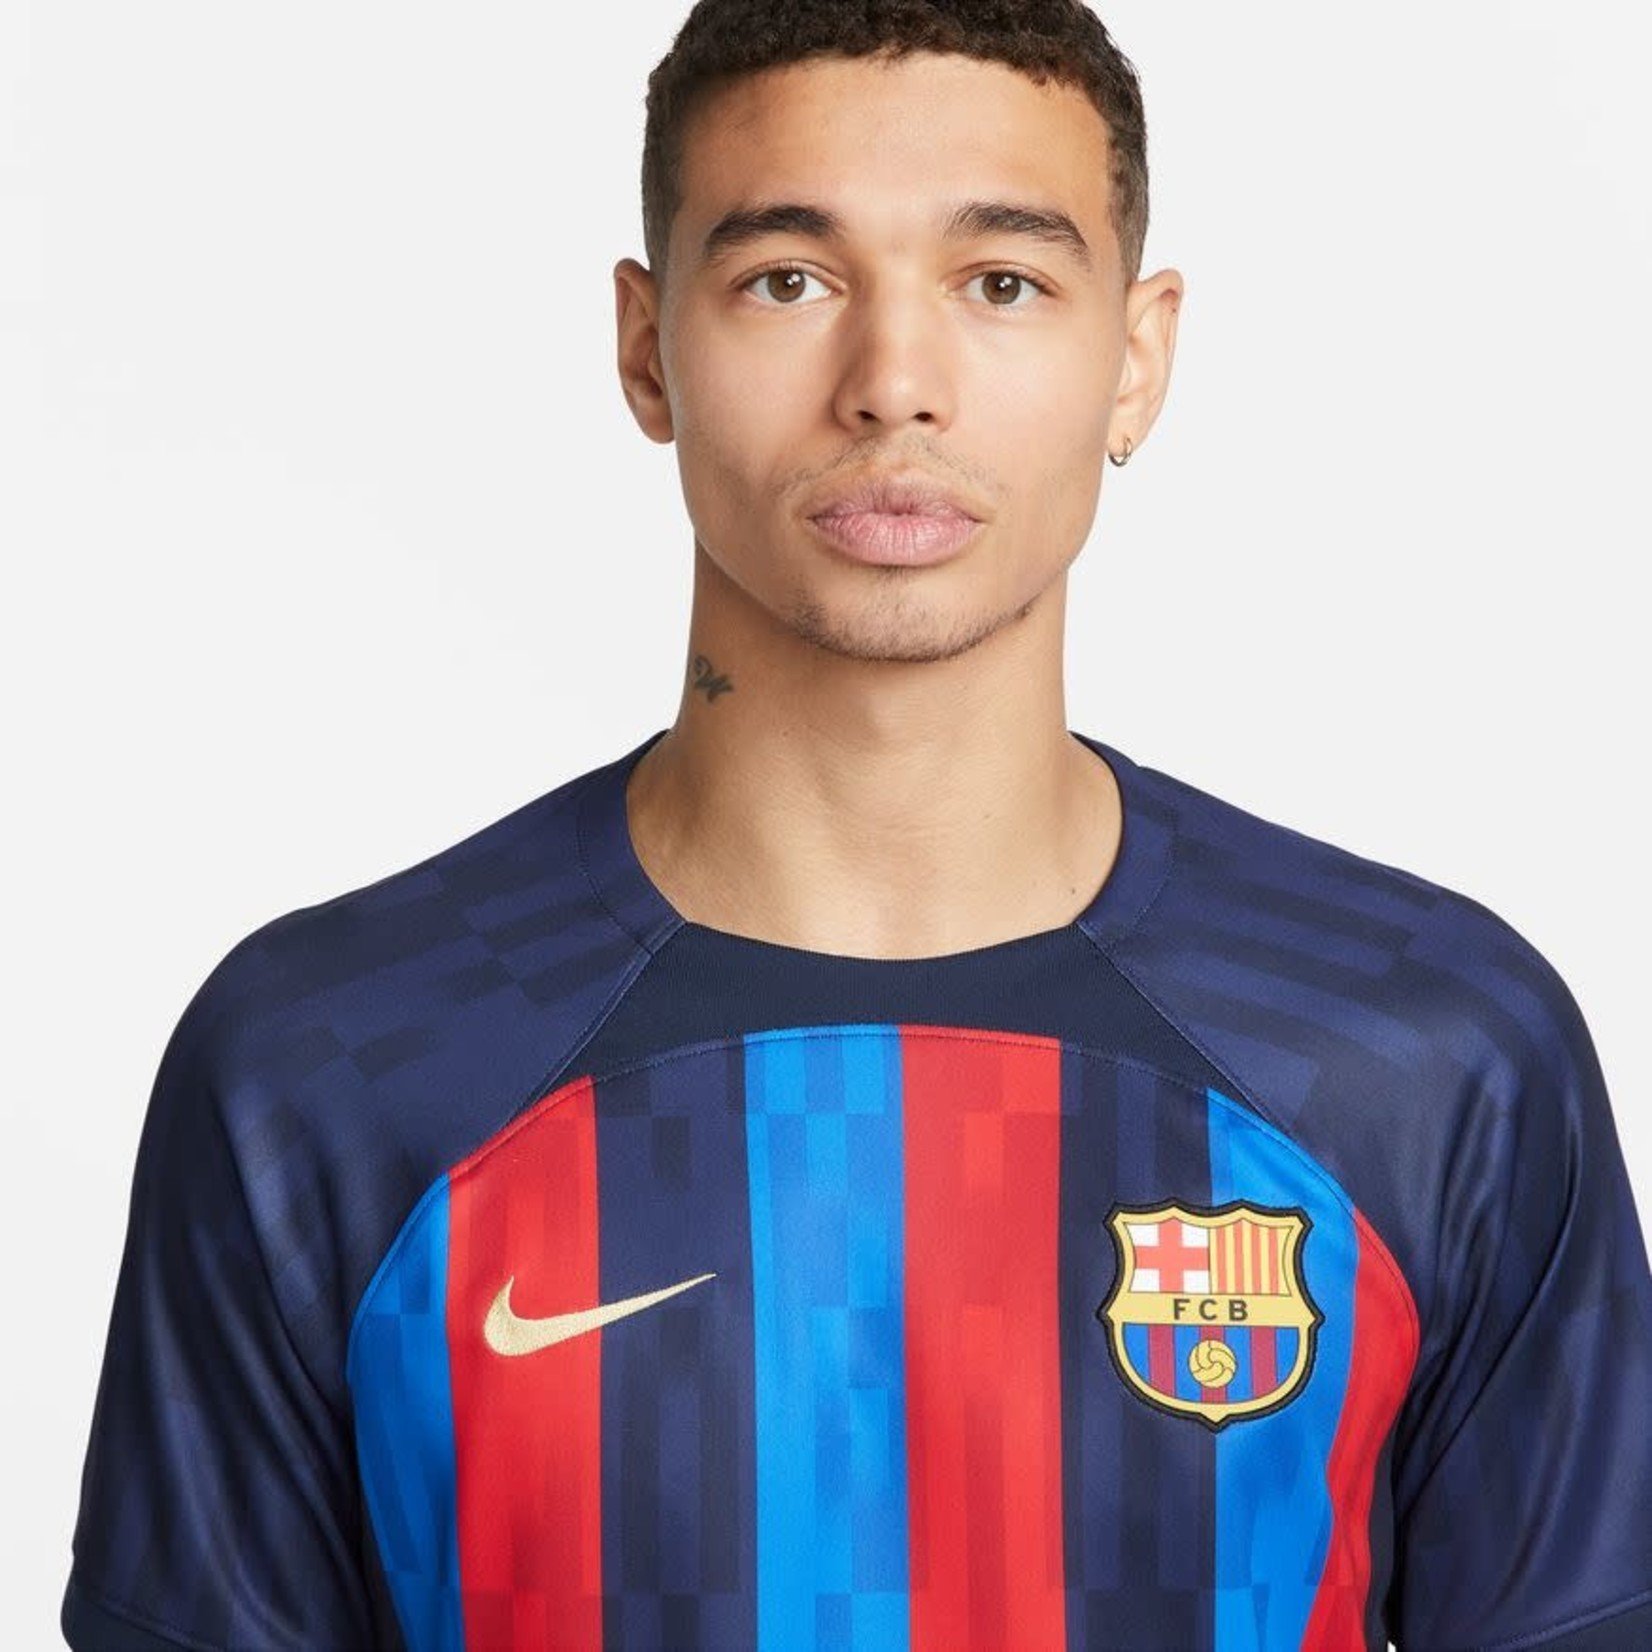 NIKE FC BARCELONA 22/23 HOME JERSEY (BLUE/RED)